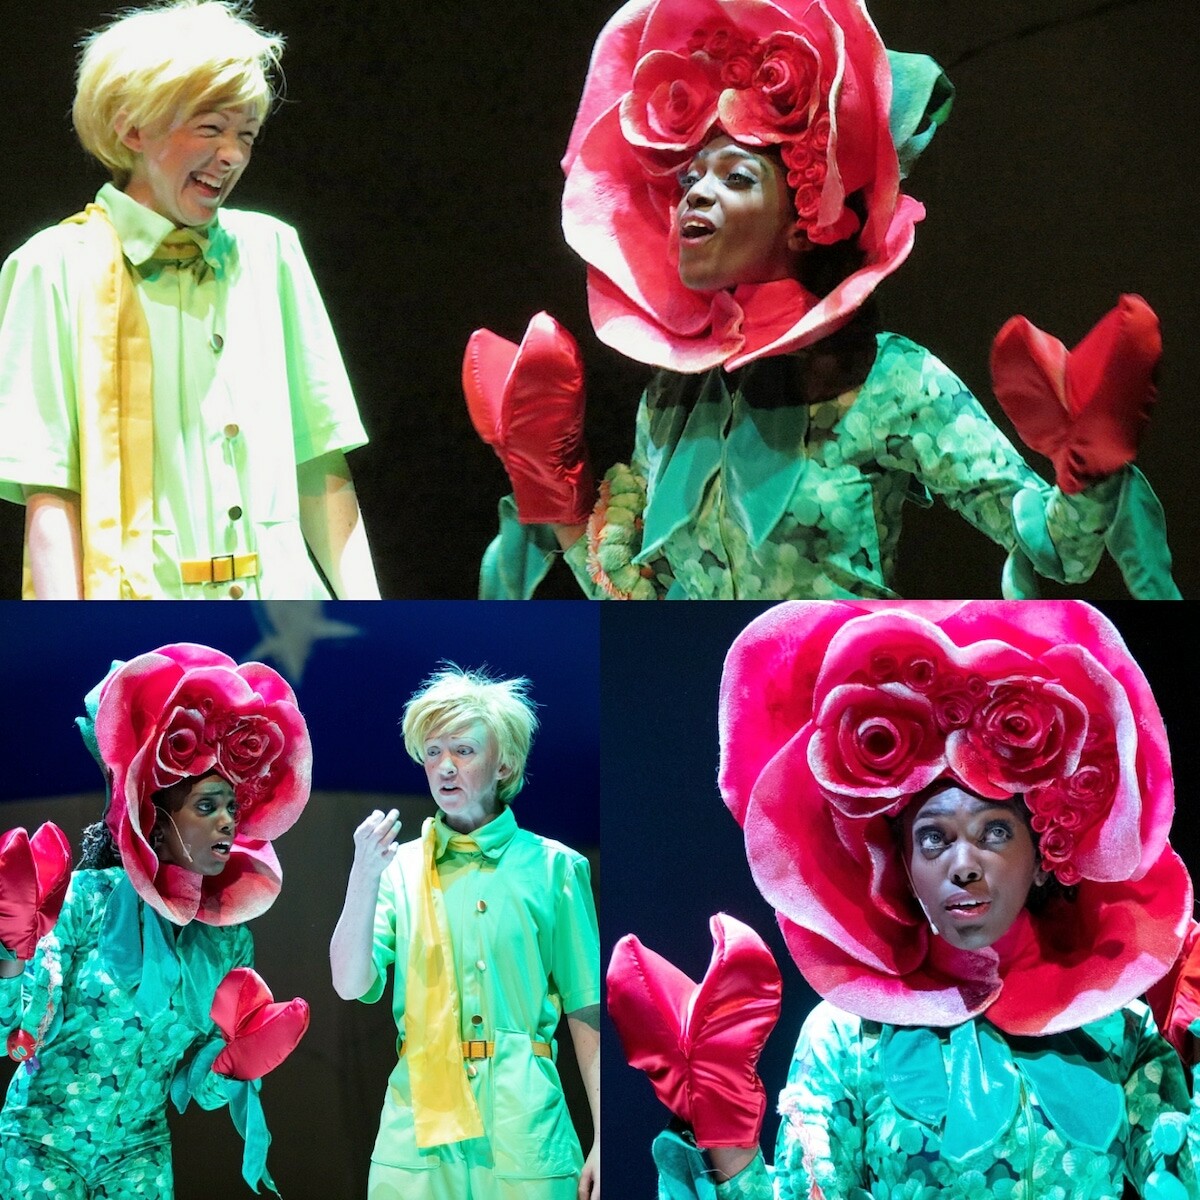 A collage of  three images featuring two actors. In each image, one actor is dressed as a flower and the other where's a bright yellow shirt, scarf with messy hair.  